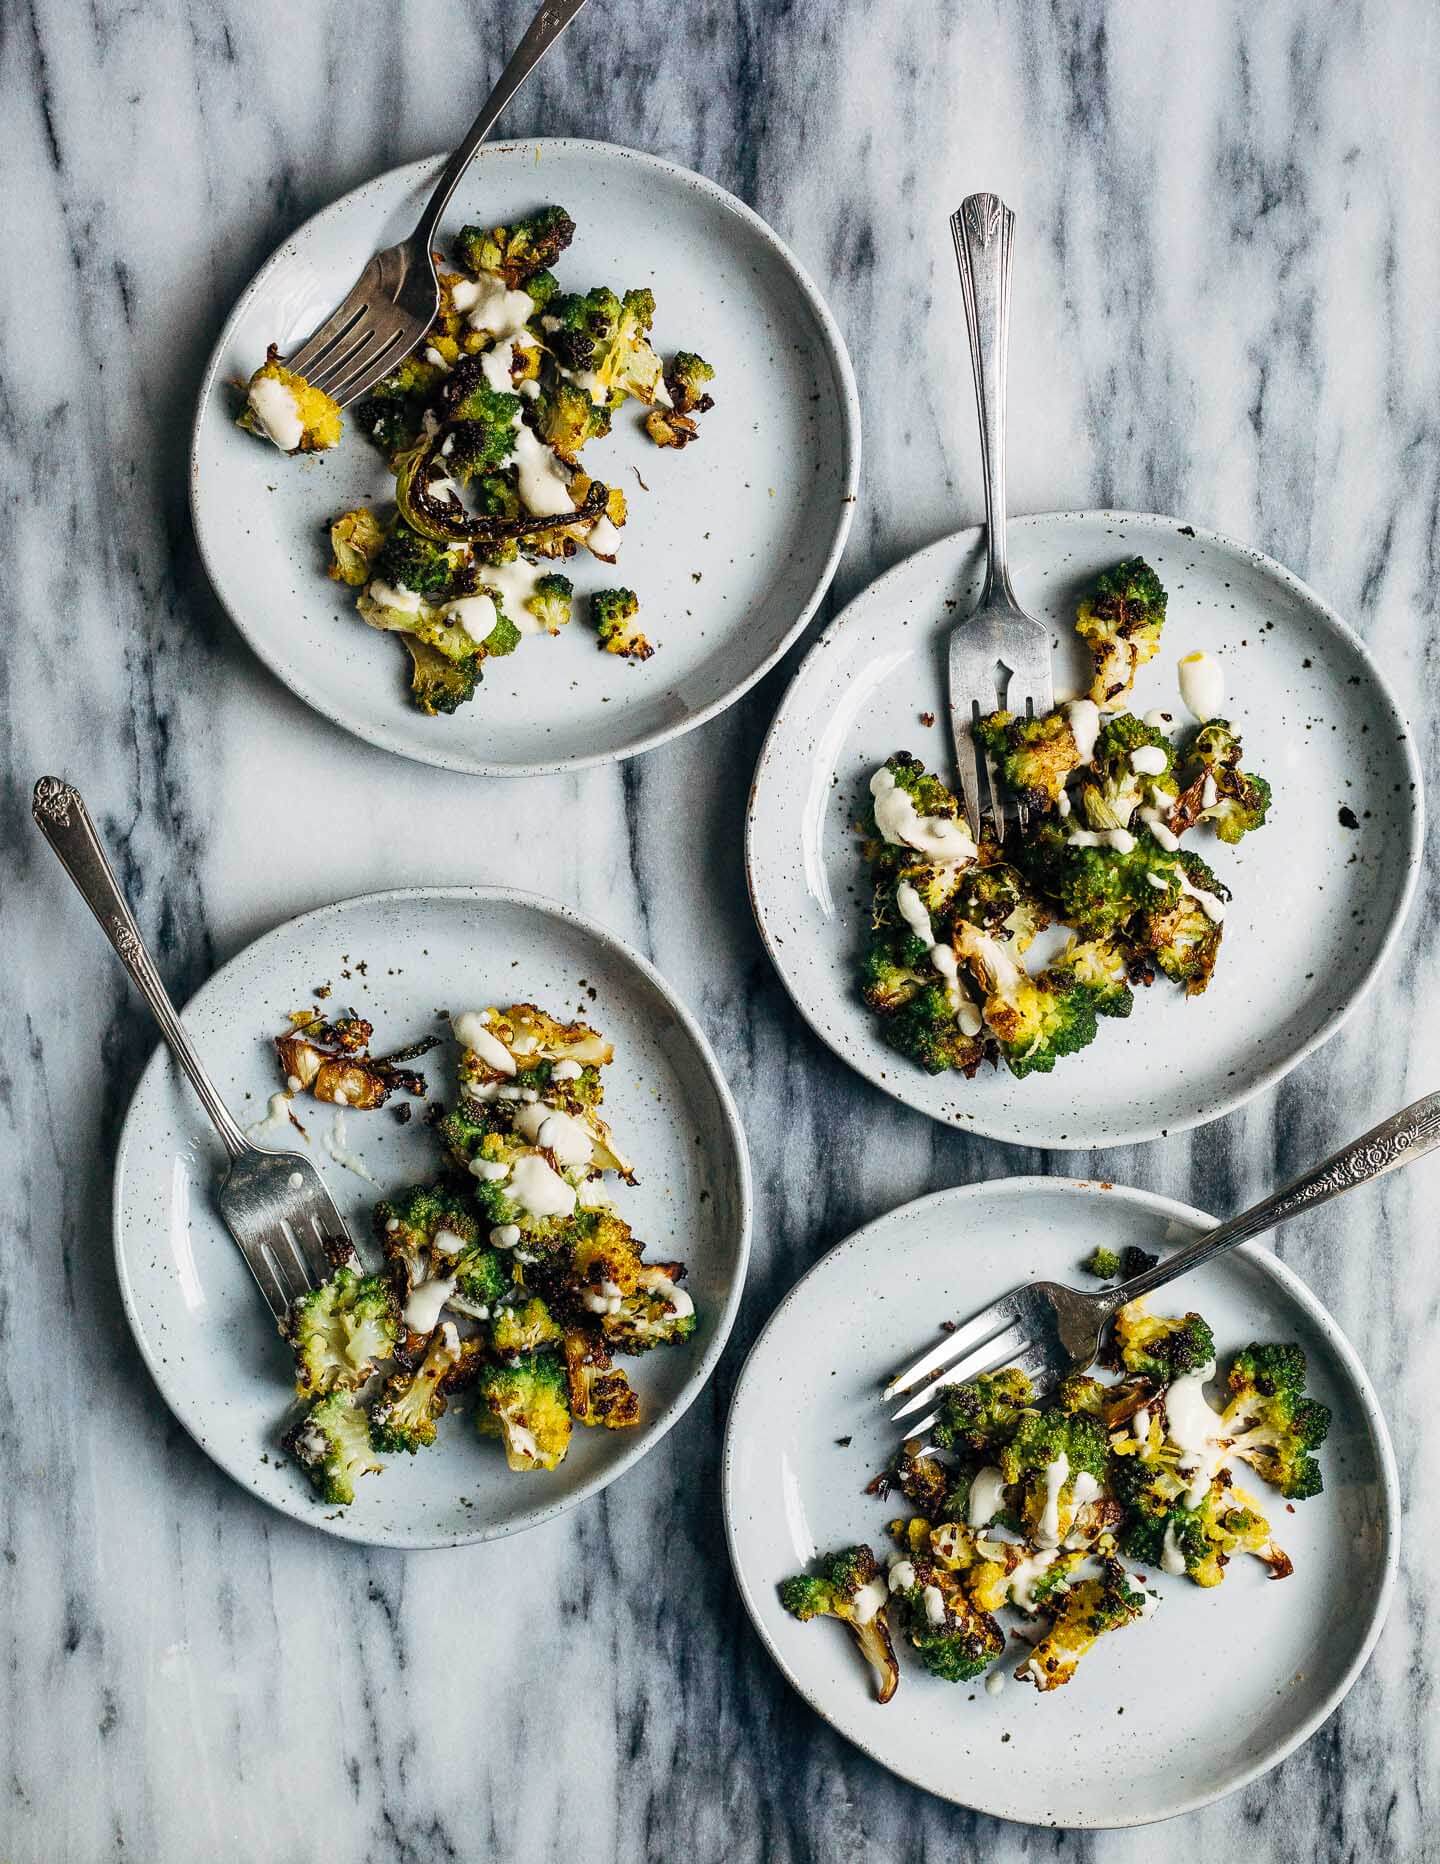 Keep winter eating interesting with this Whole30-compliant recipe for roasted Romanesco broccoli paired with a creamy vegan sunflower seed dressing made with soaked sunflower seeds and fresh Meyer lemons.